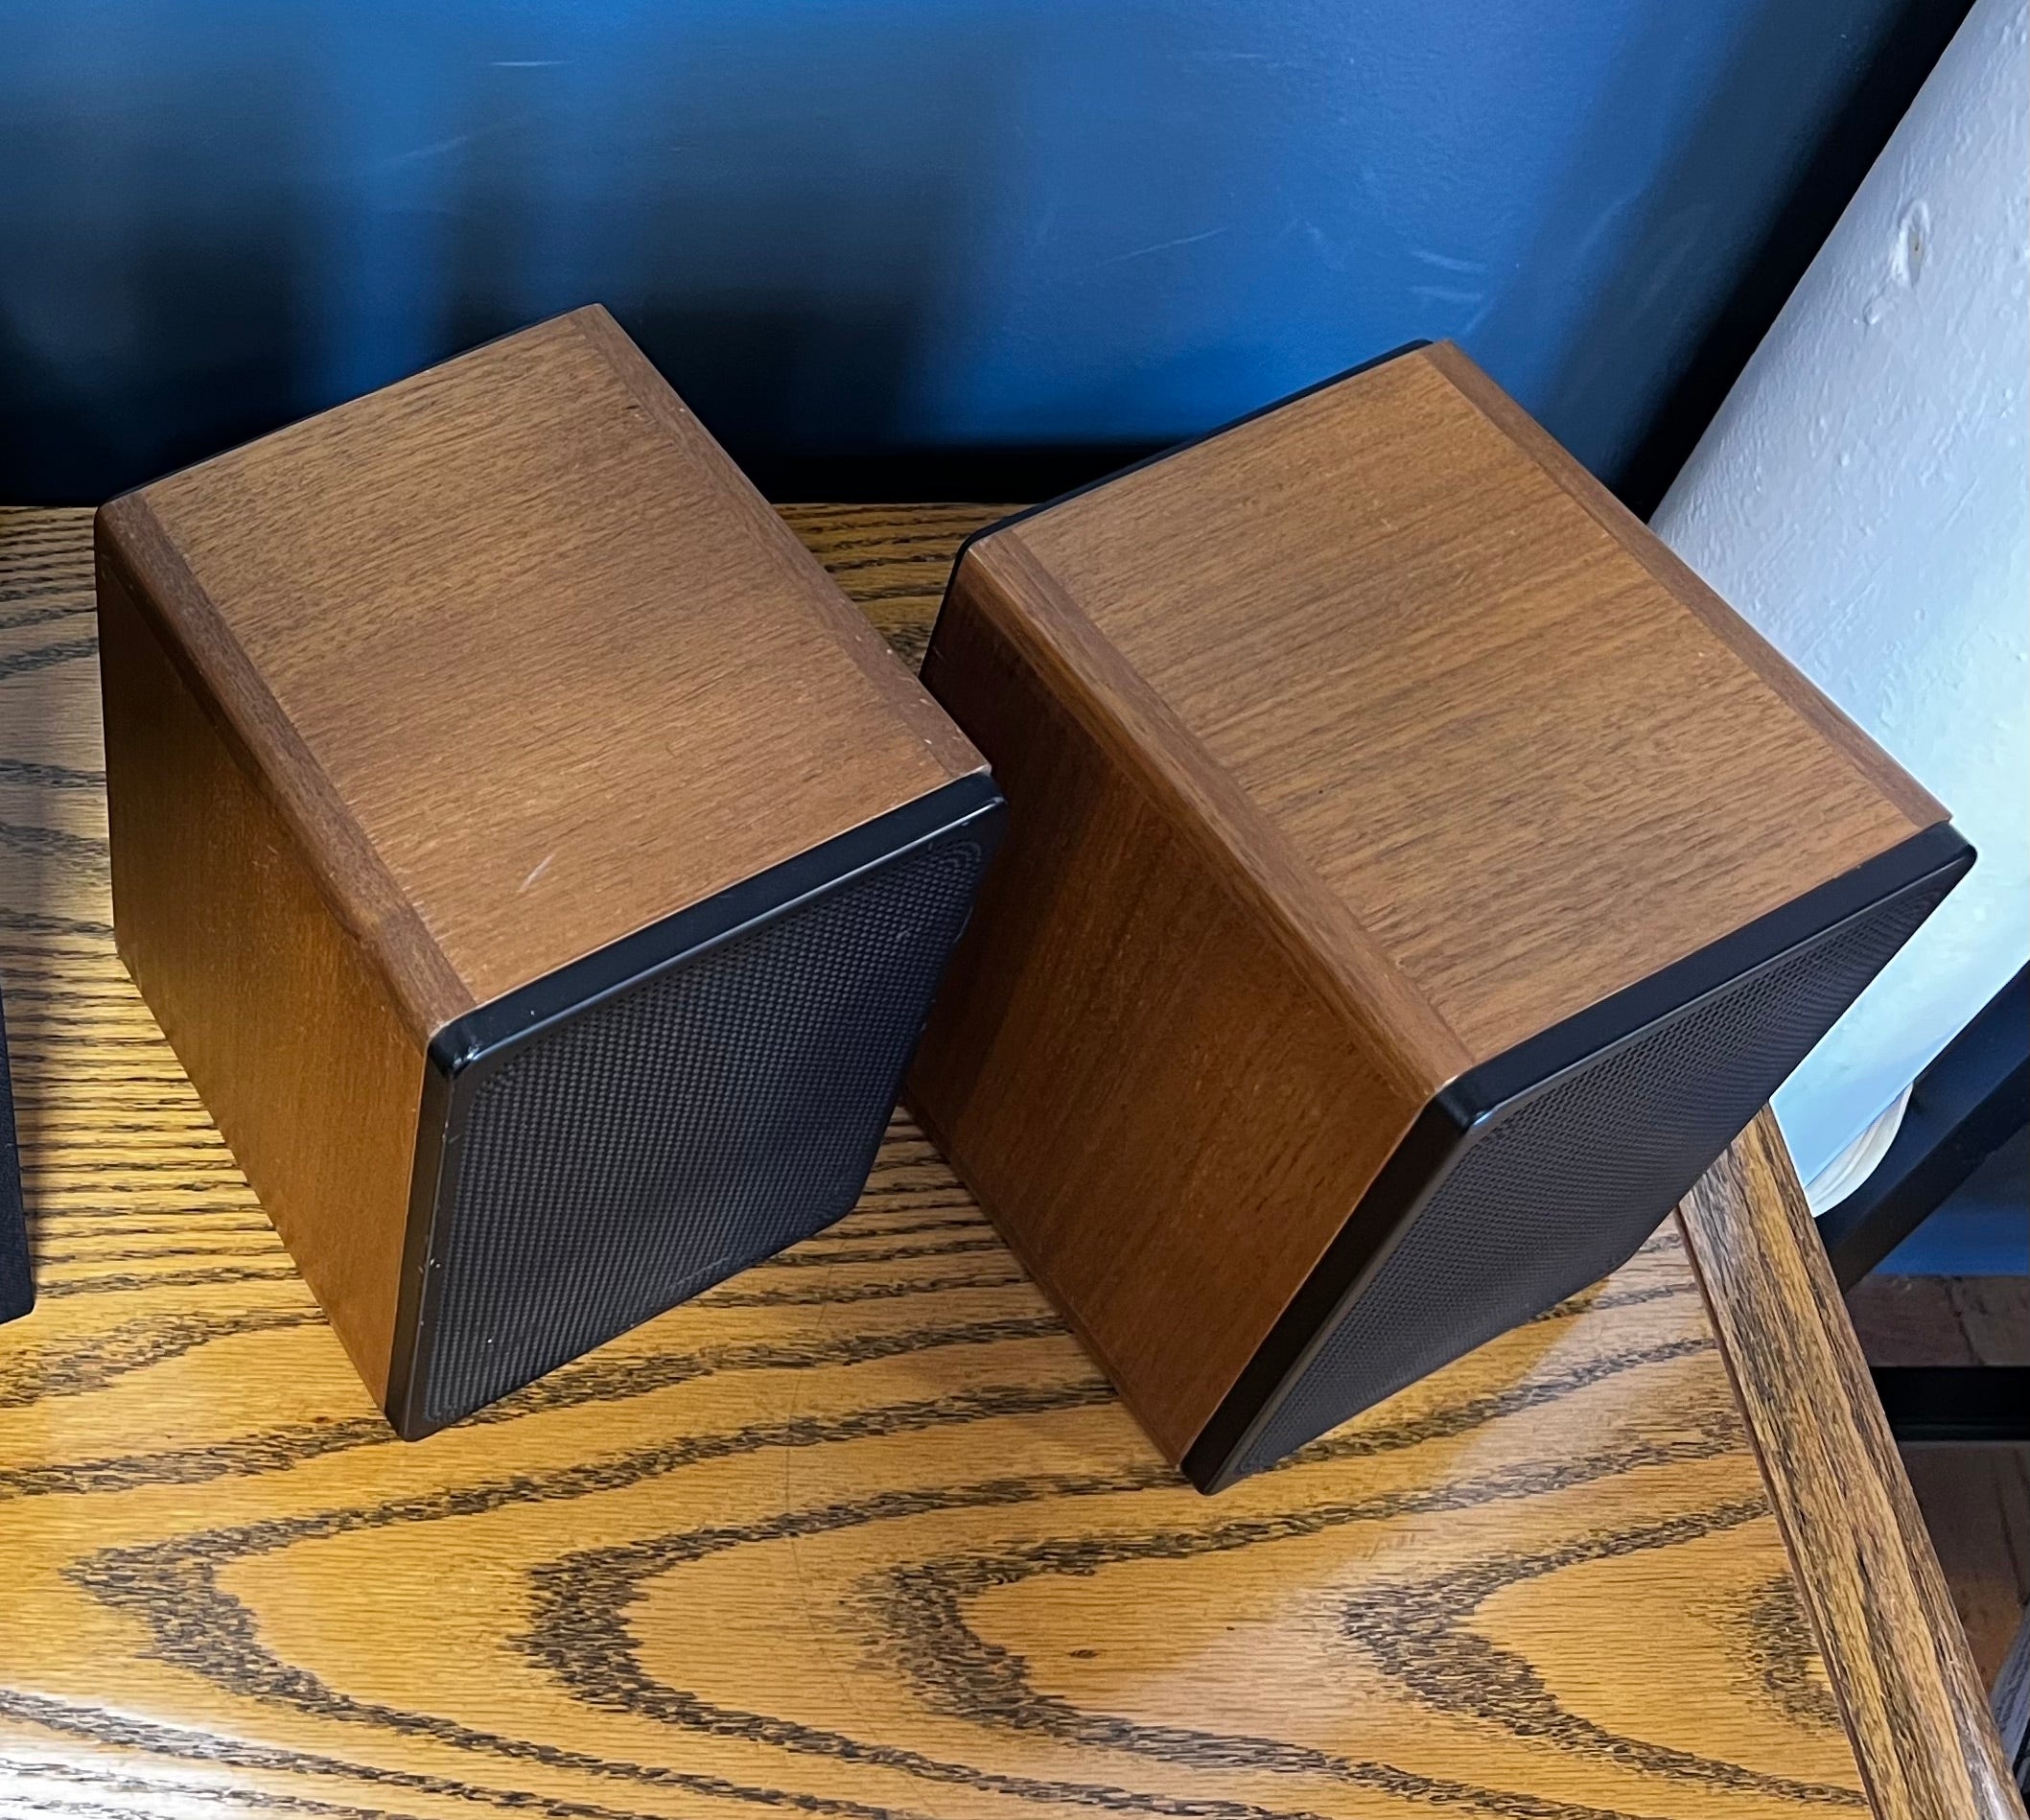 ADS L300 Compact Speakers, Walnut Cabinets - SOLD